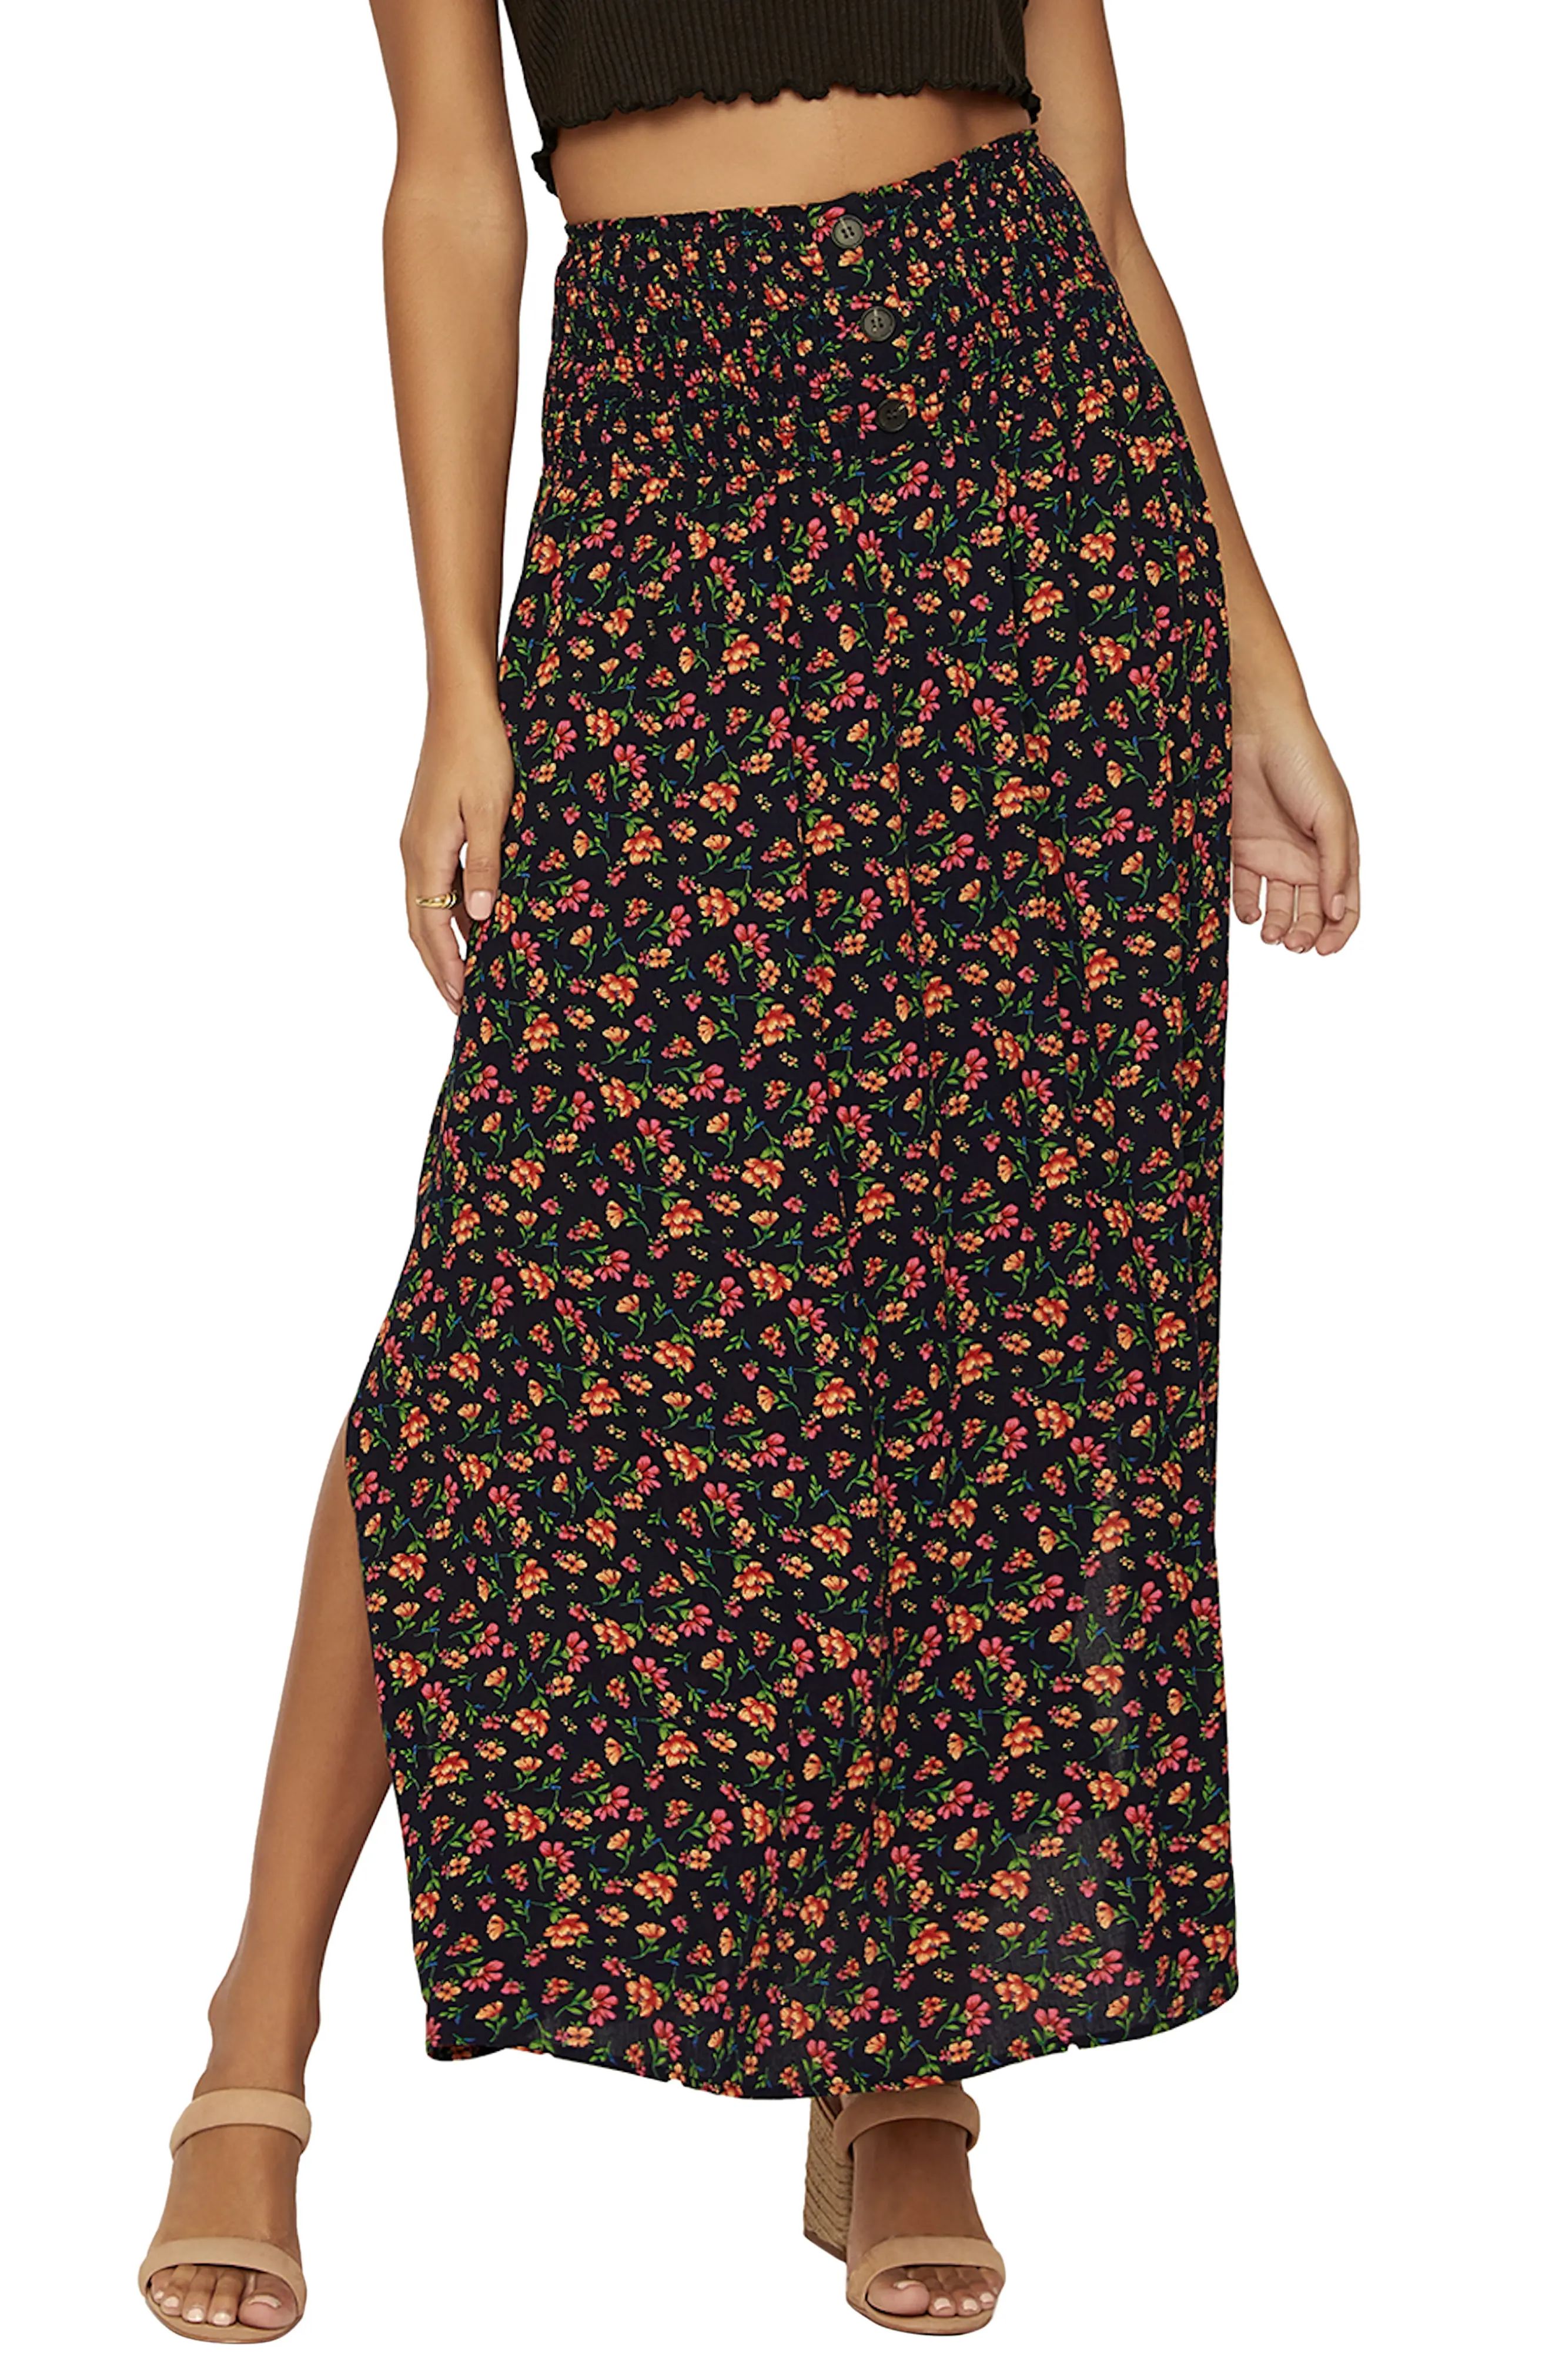 Lost + Wander Party Till Dawn Floral Maxi Skirt in Black Multi at Nordstrom, Size Small | Nordstrom